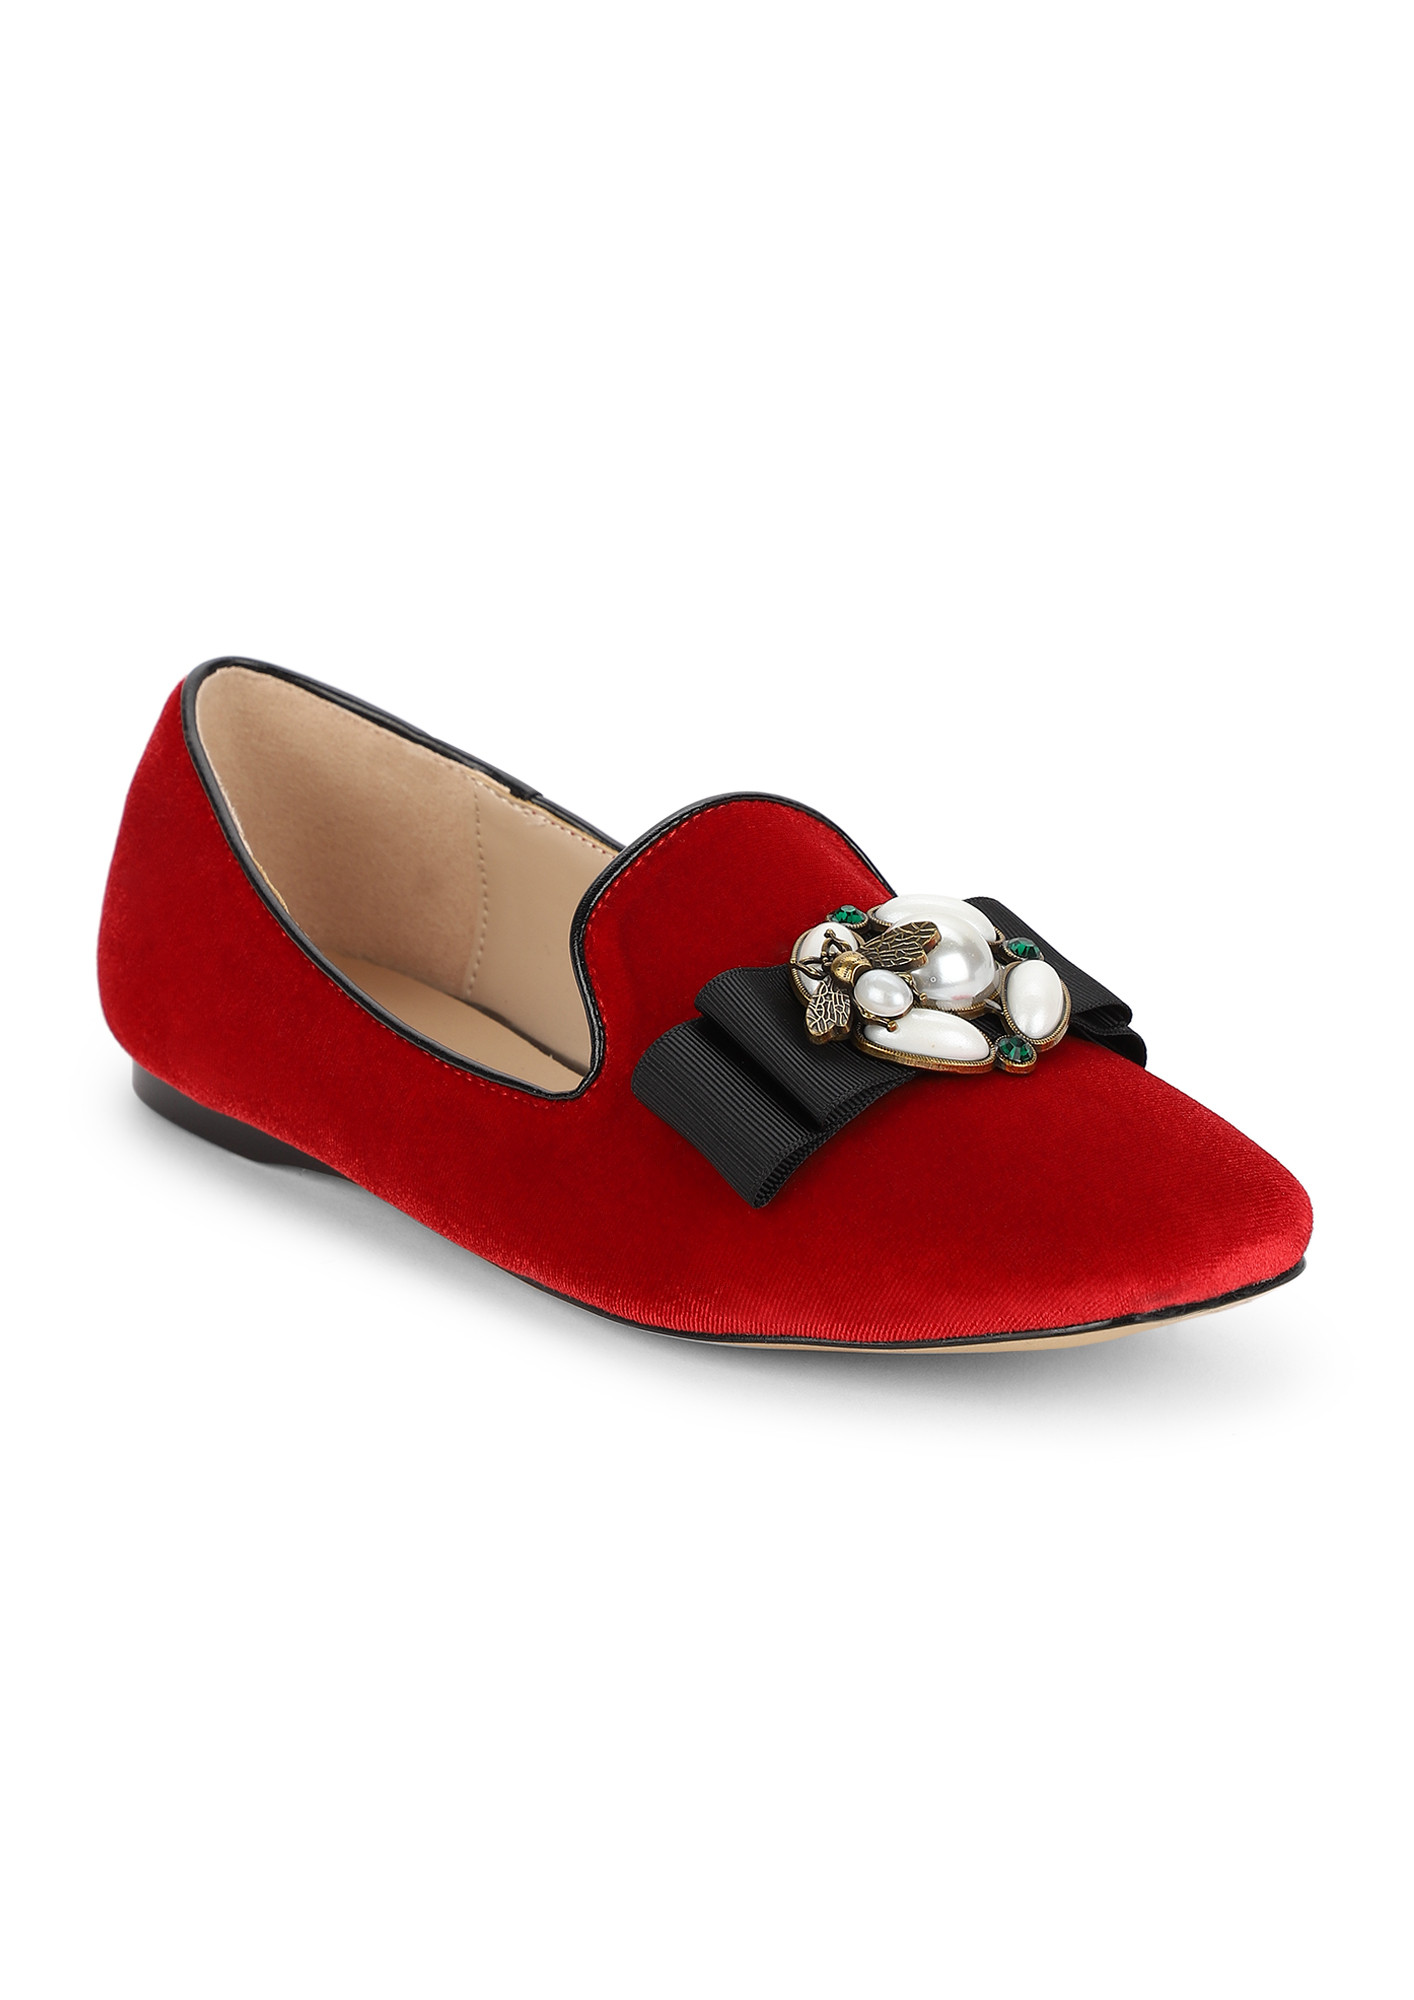 LOVE PEARLS ON TOP RED FLAT SHOES